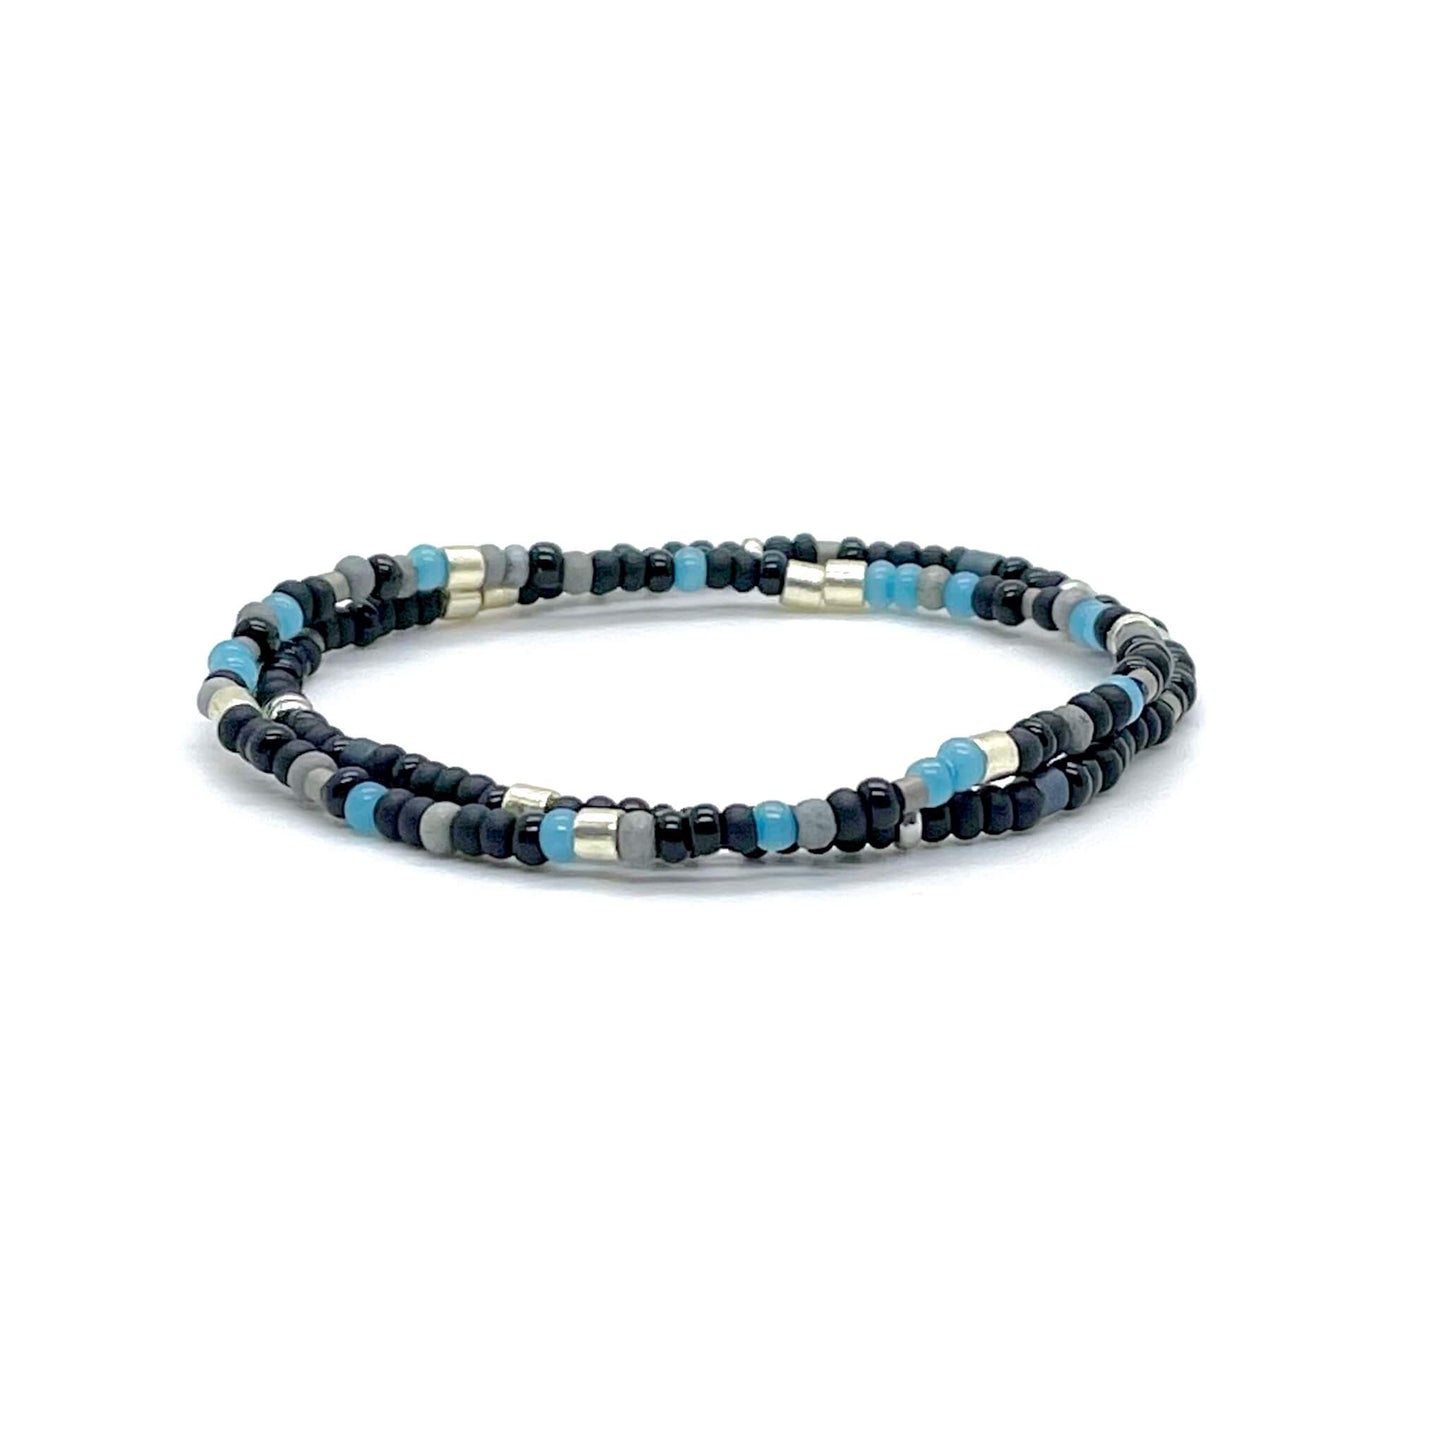 Men’s hand beaded boho stretch bracelets with black, gray, light blue, and silver tone seed beads.